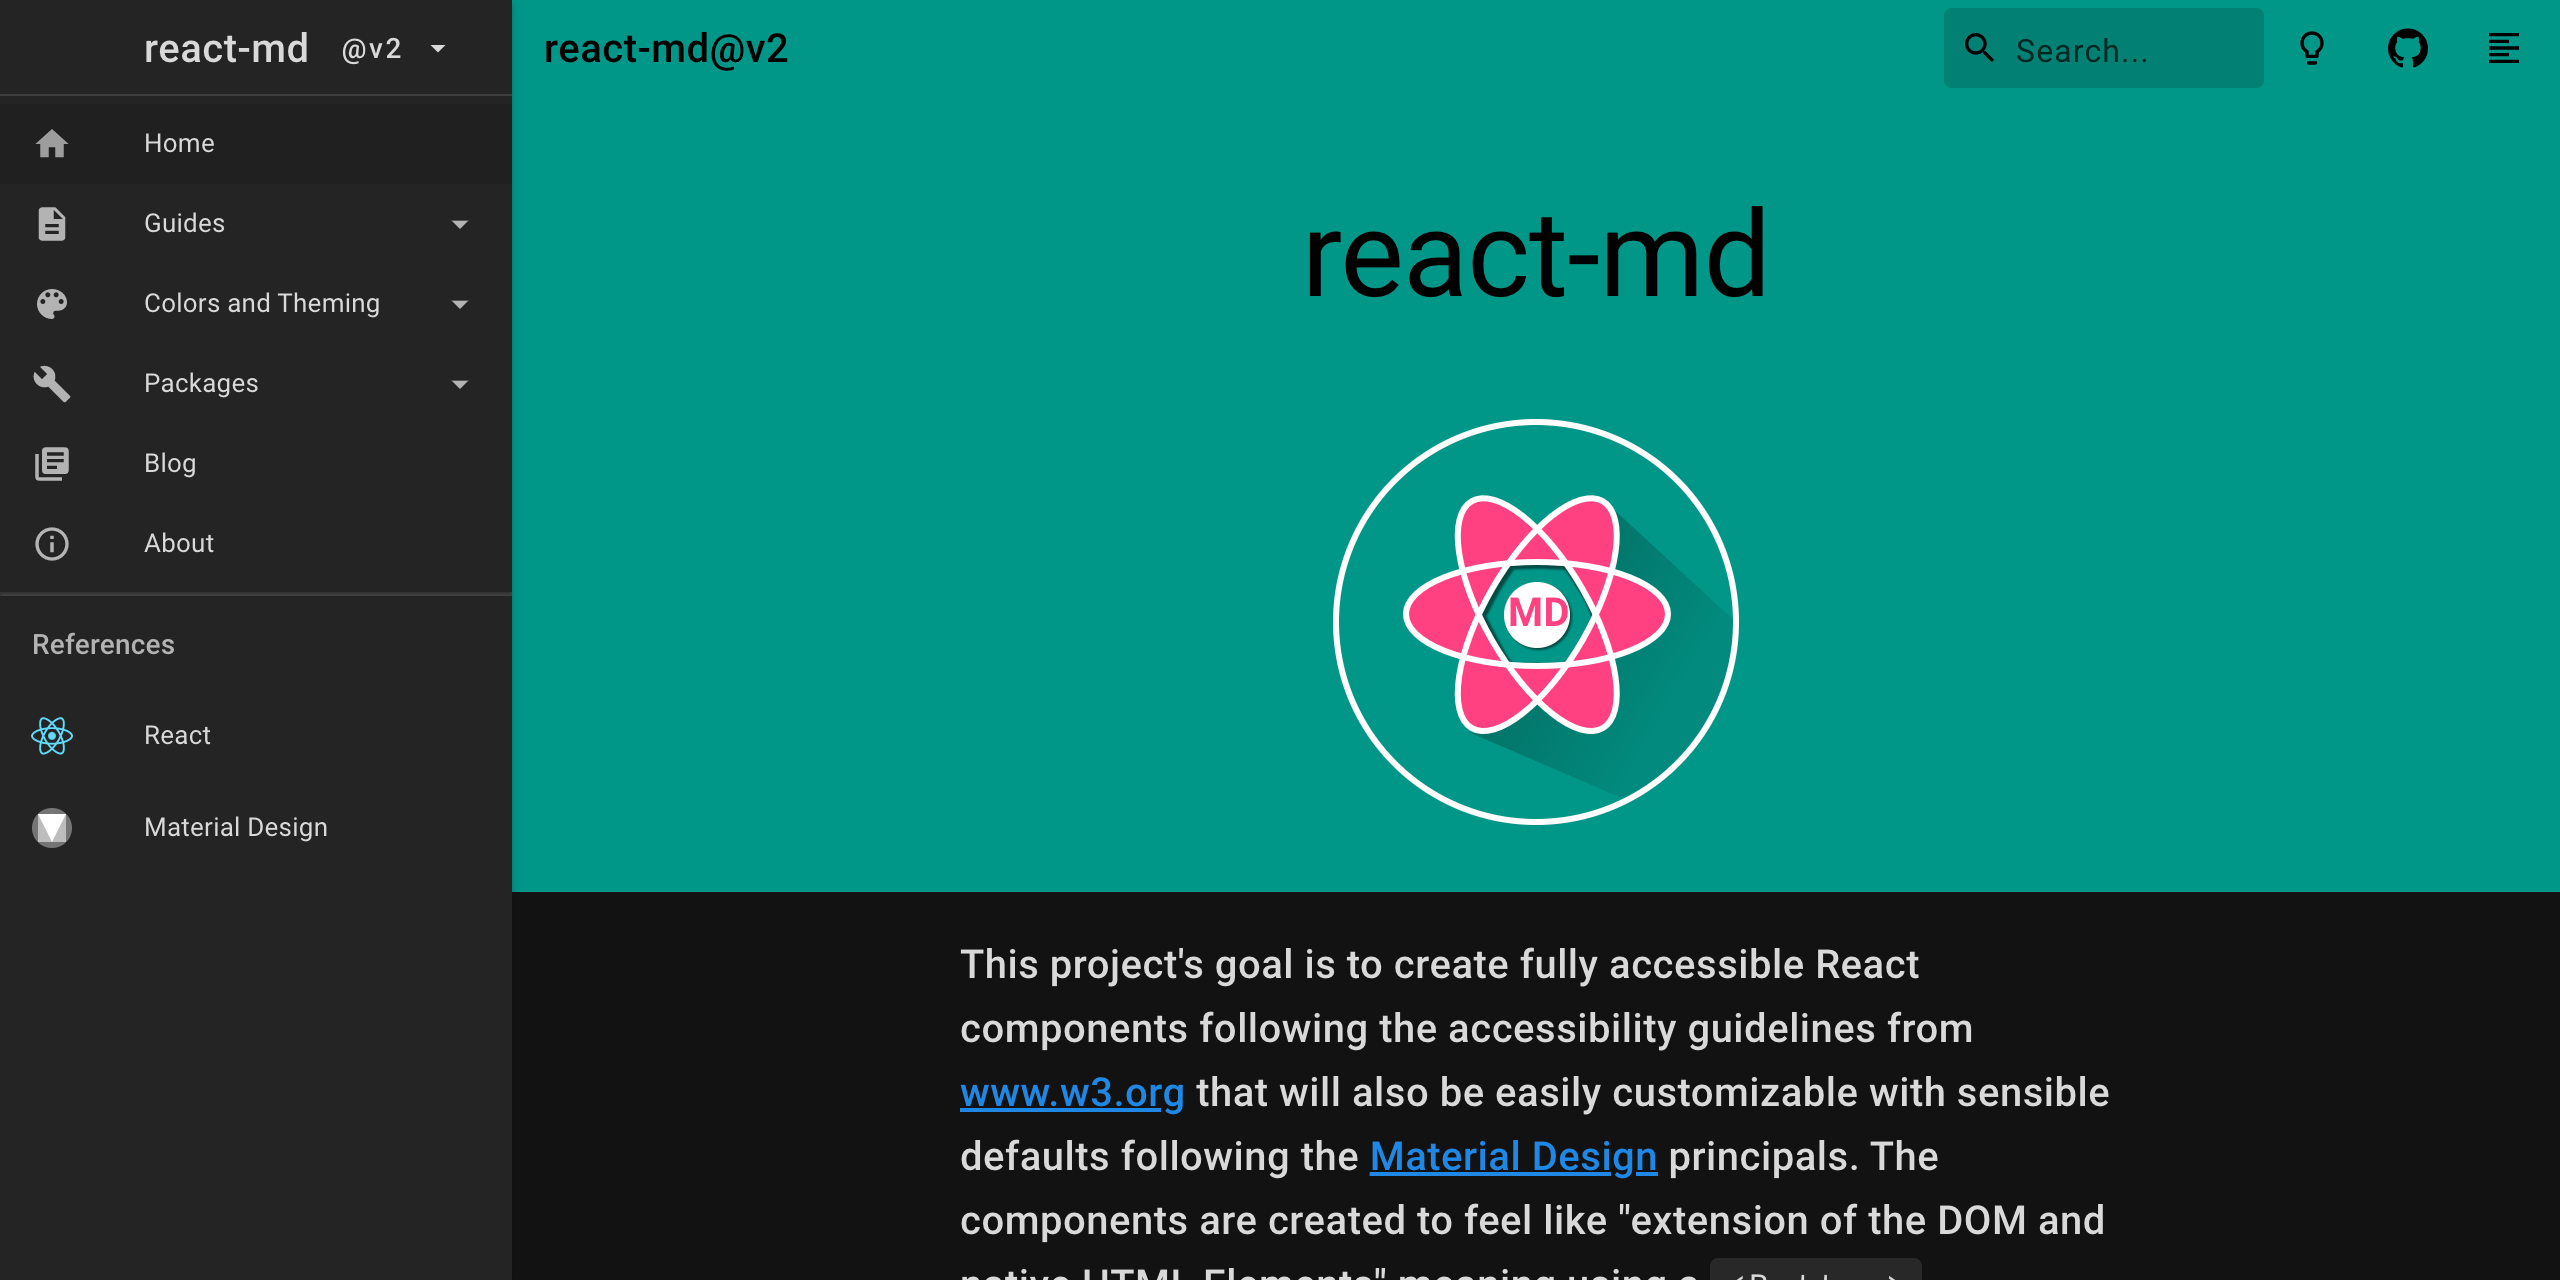 react-md